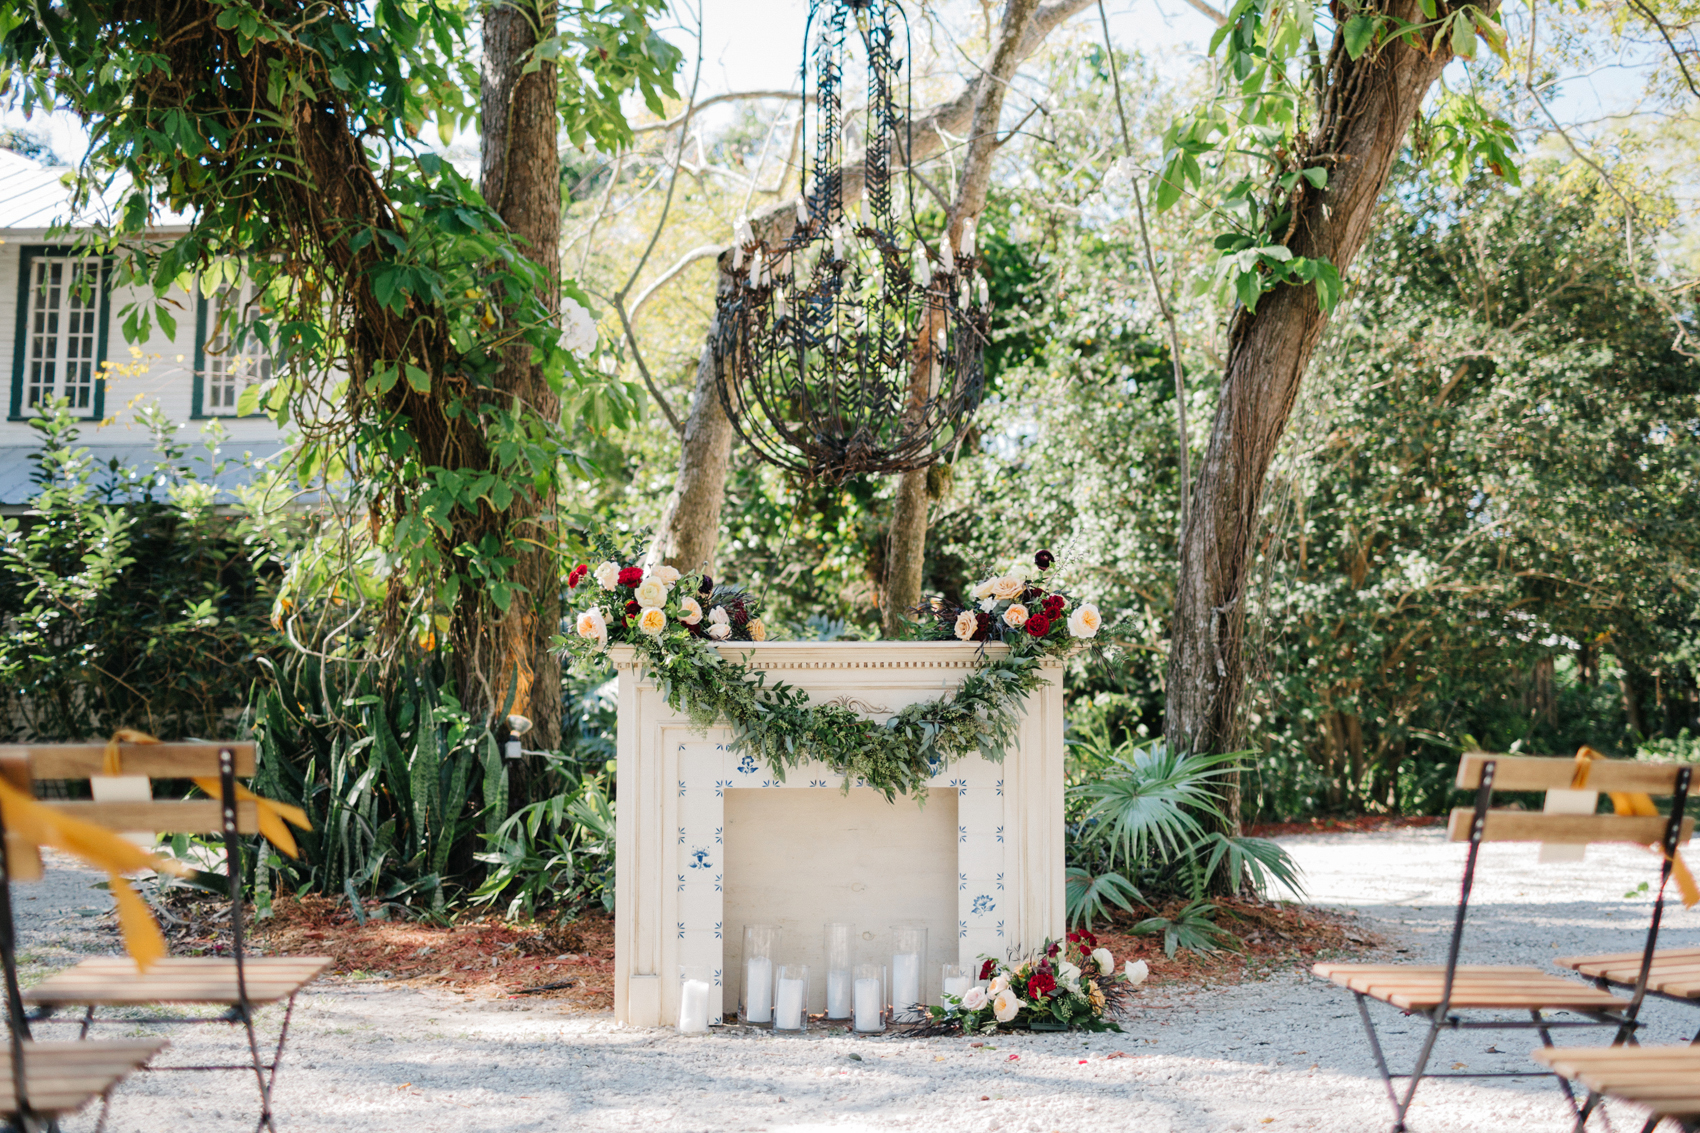 vintage mantle at the garden ceremony with romantic candles and a garland of greenery and flowers